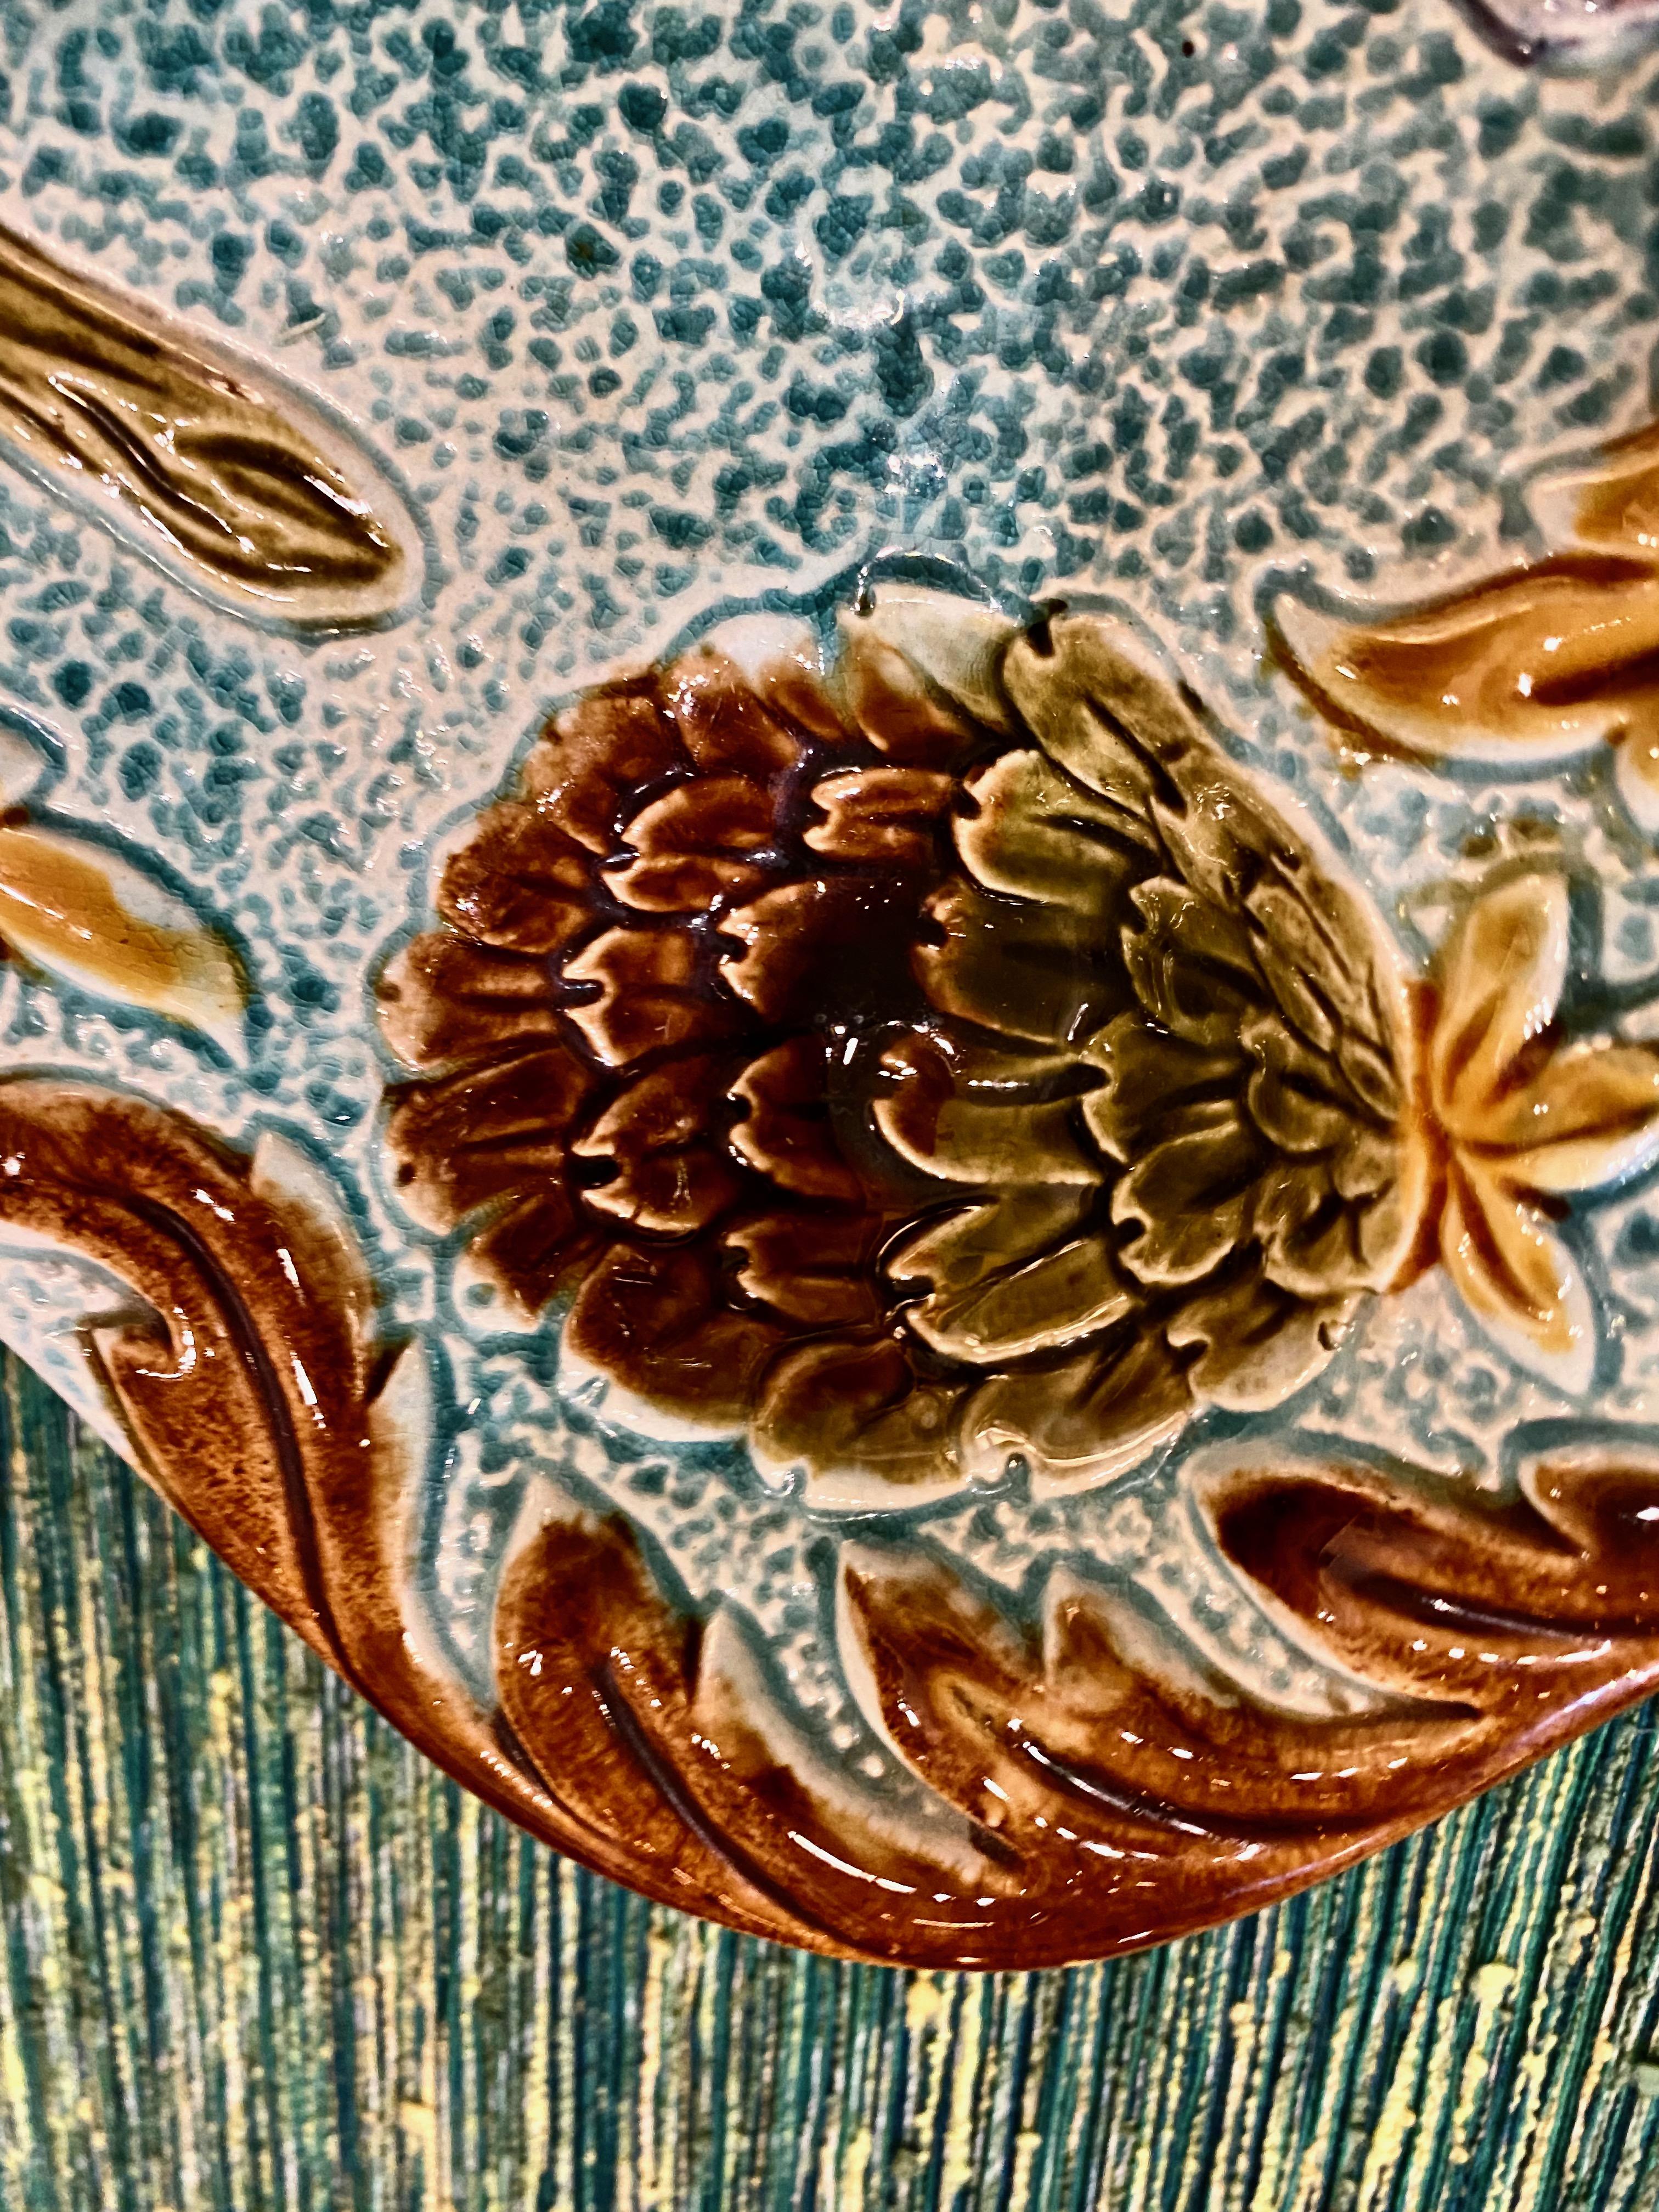 Faience Large French Majolica Platter, c. 1880